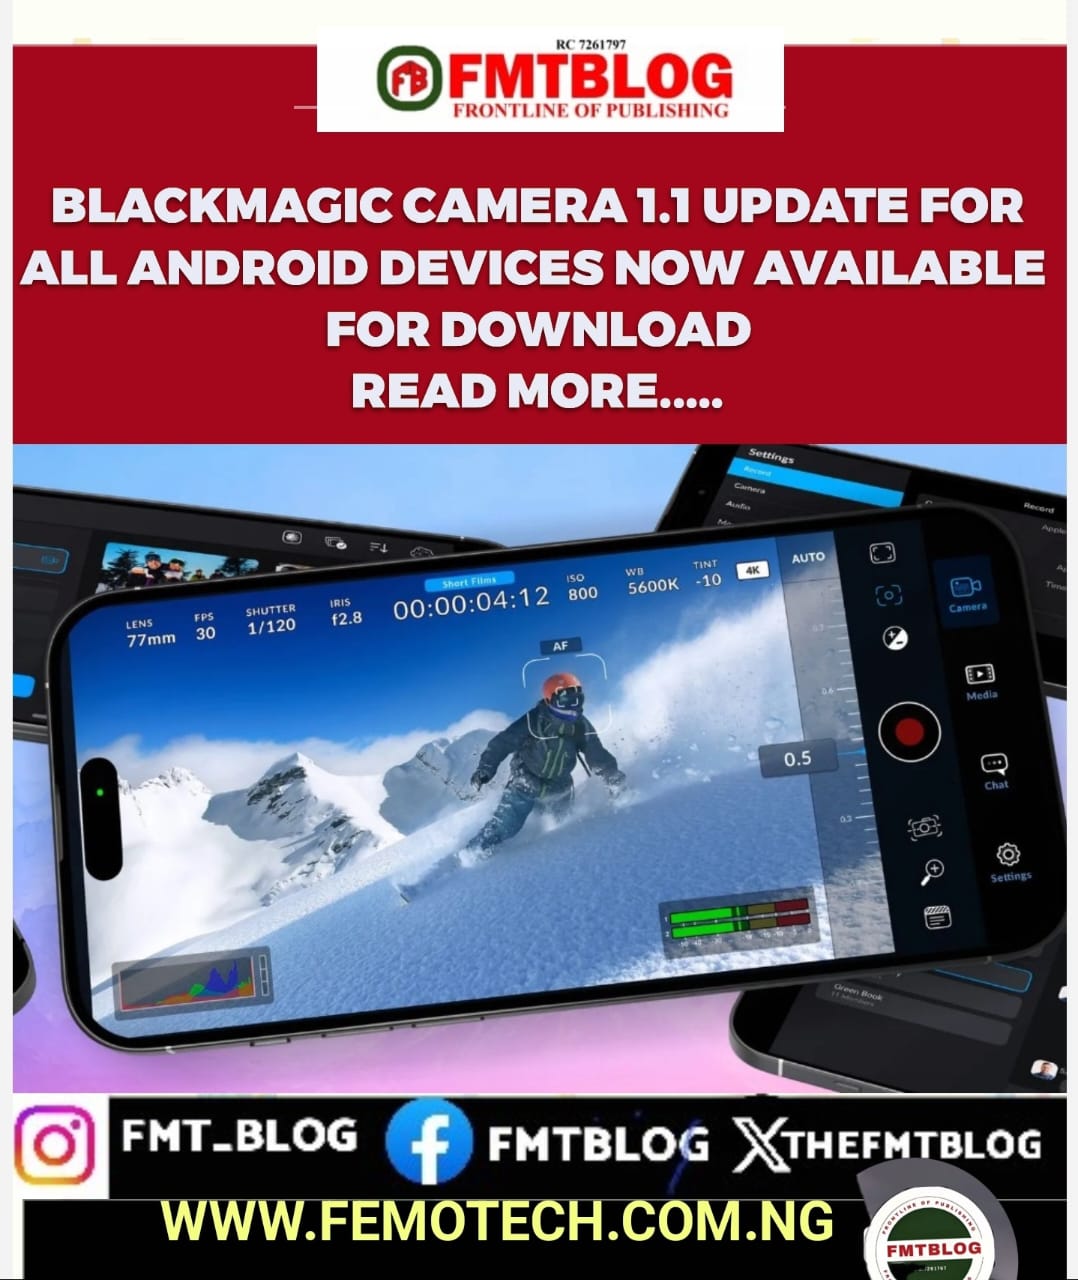 Blackmagic Camera 1.1 Update For All Android Devices Now Available For Download